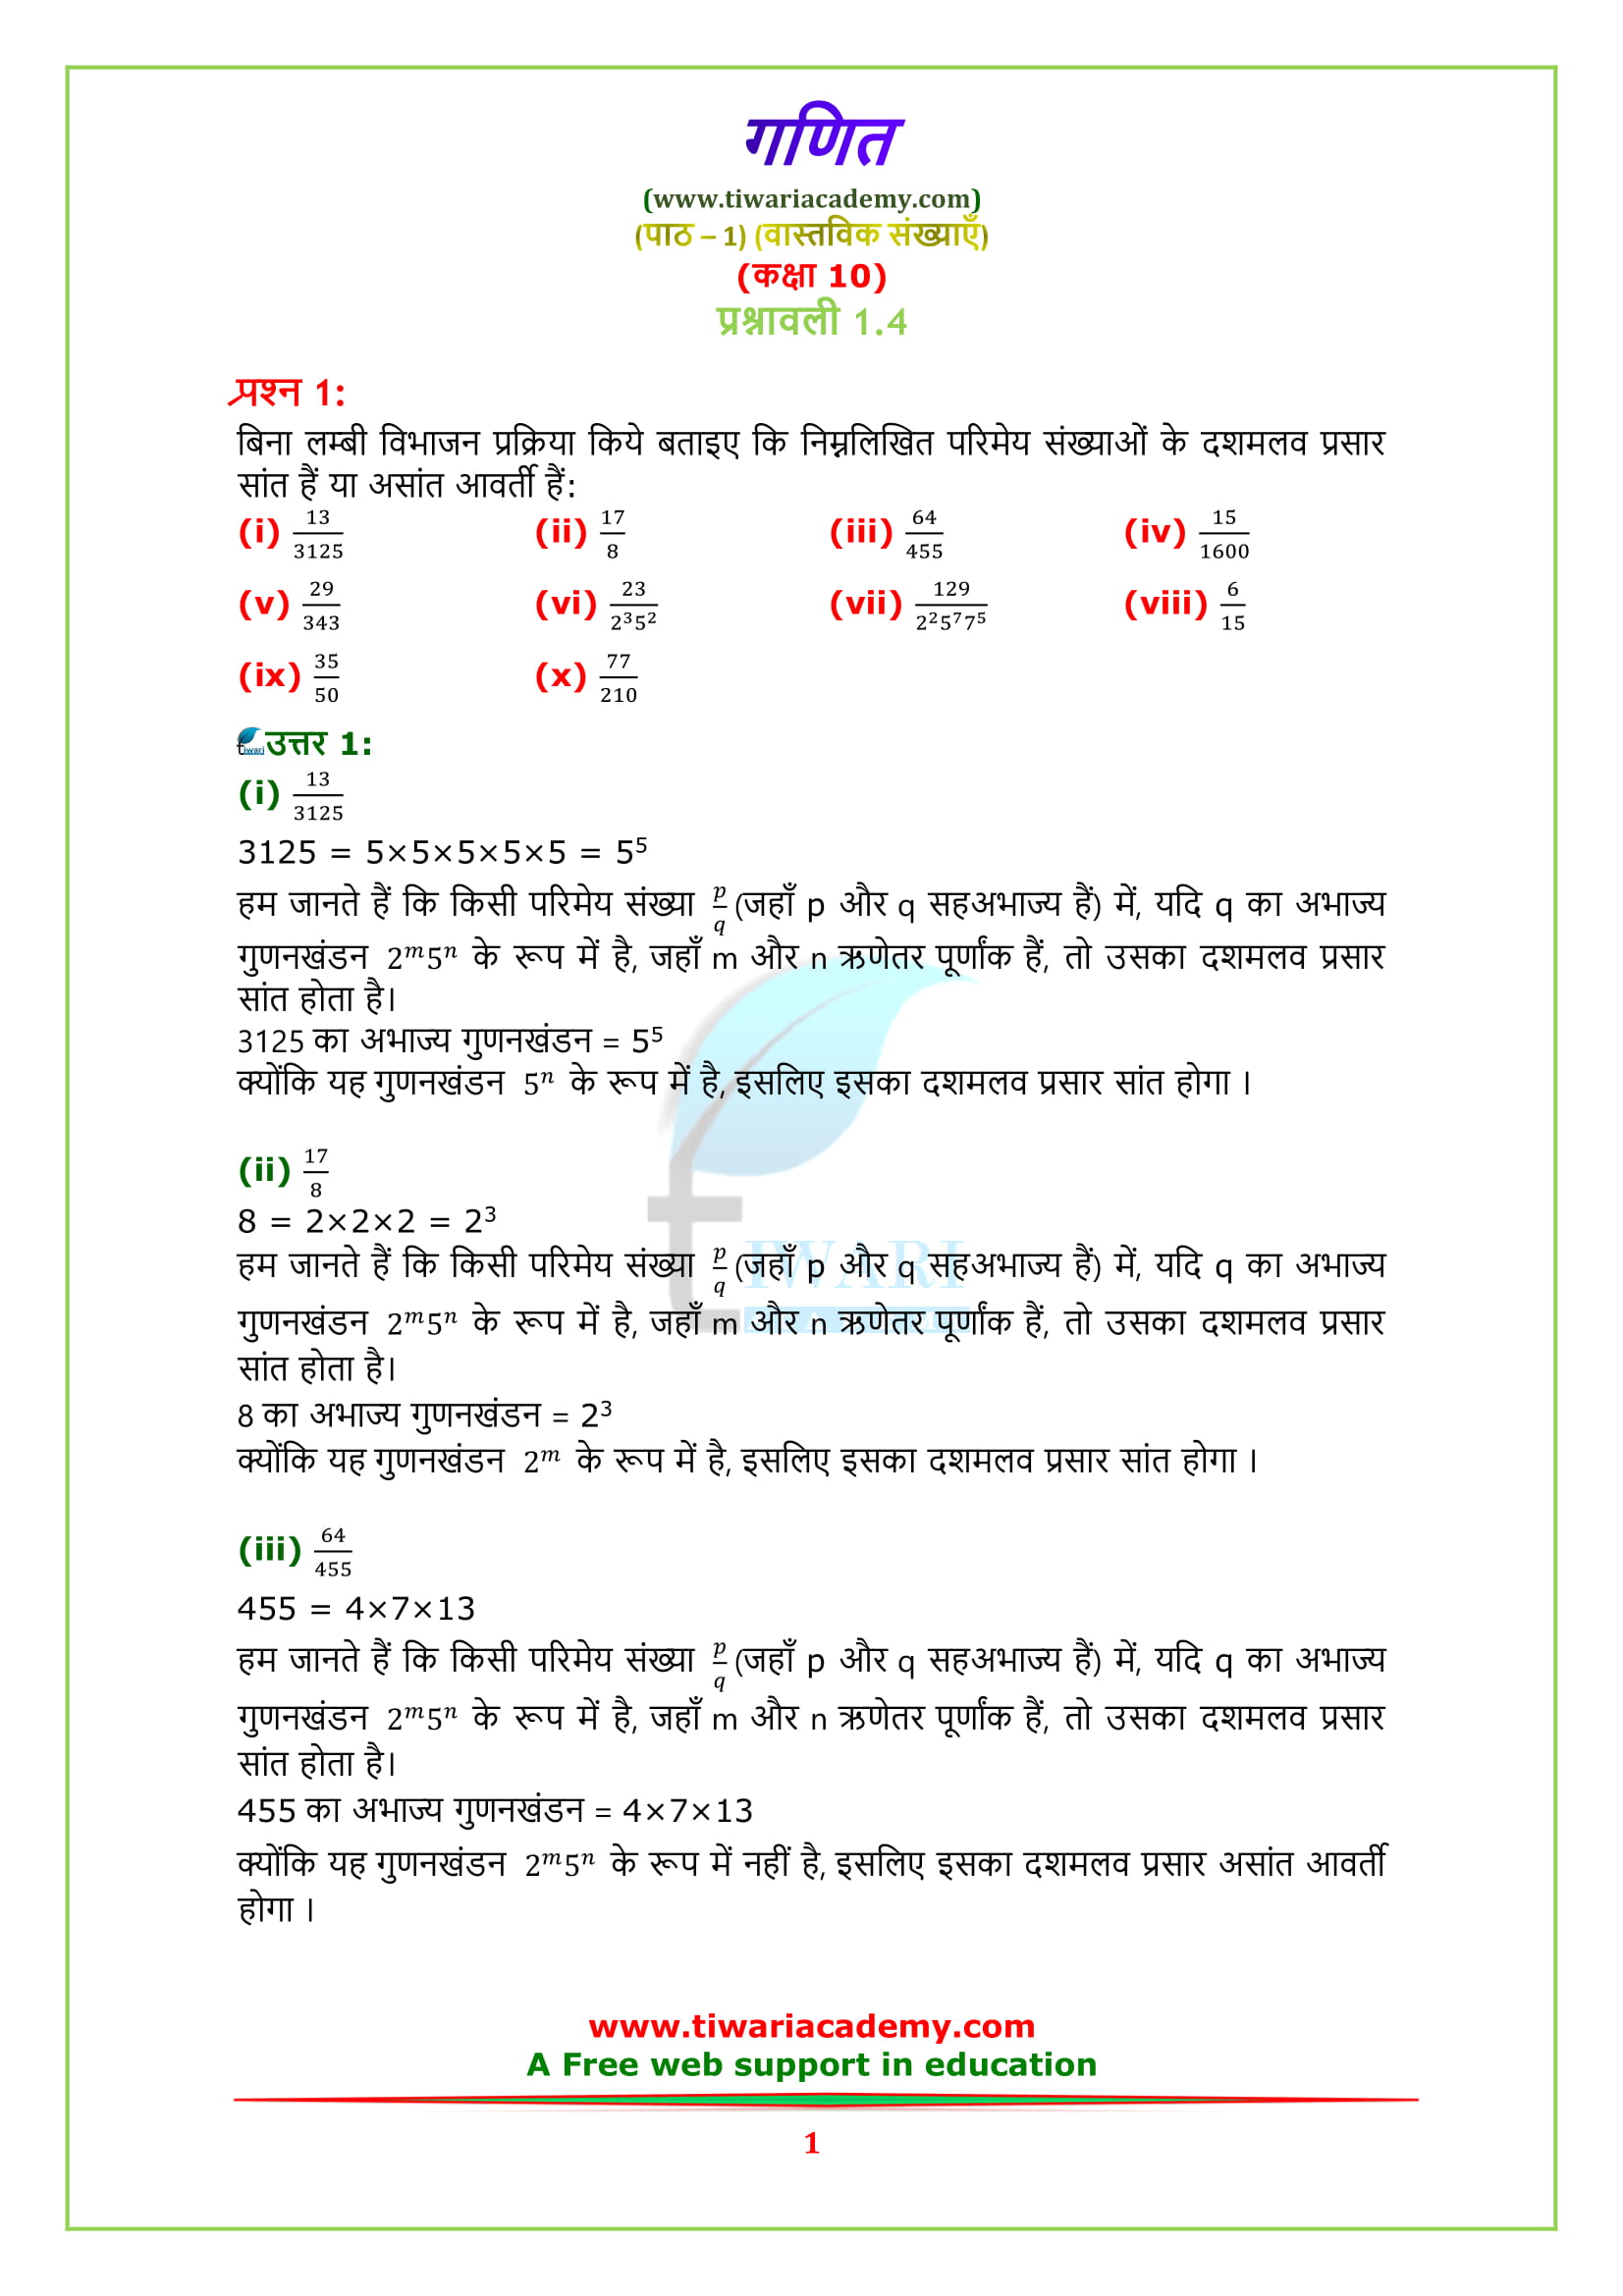 10th ncert math solution in hindi pdf download